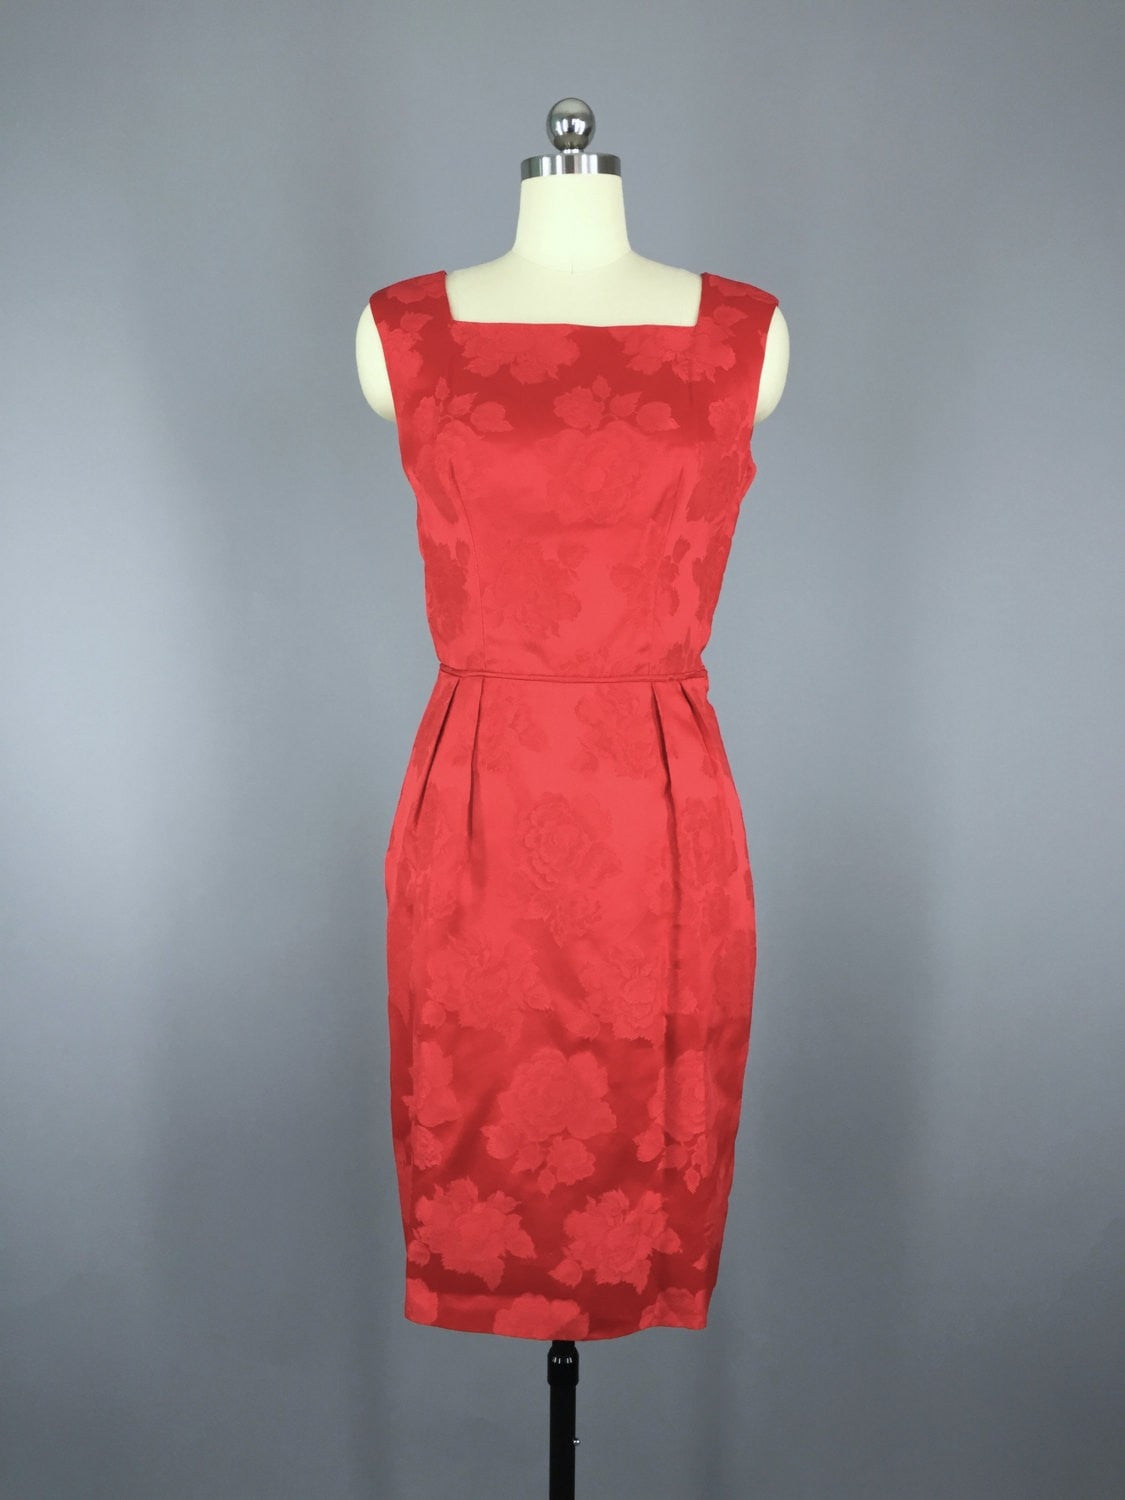 1950s Vintage Red Satin Damask Cocktail Dress - ThisBlueBird